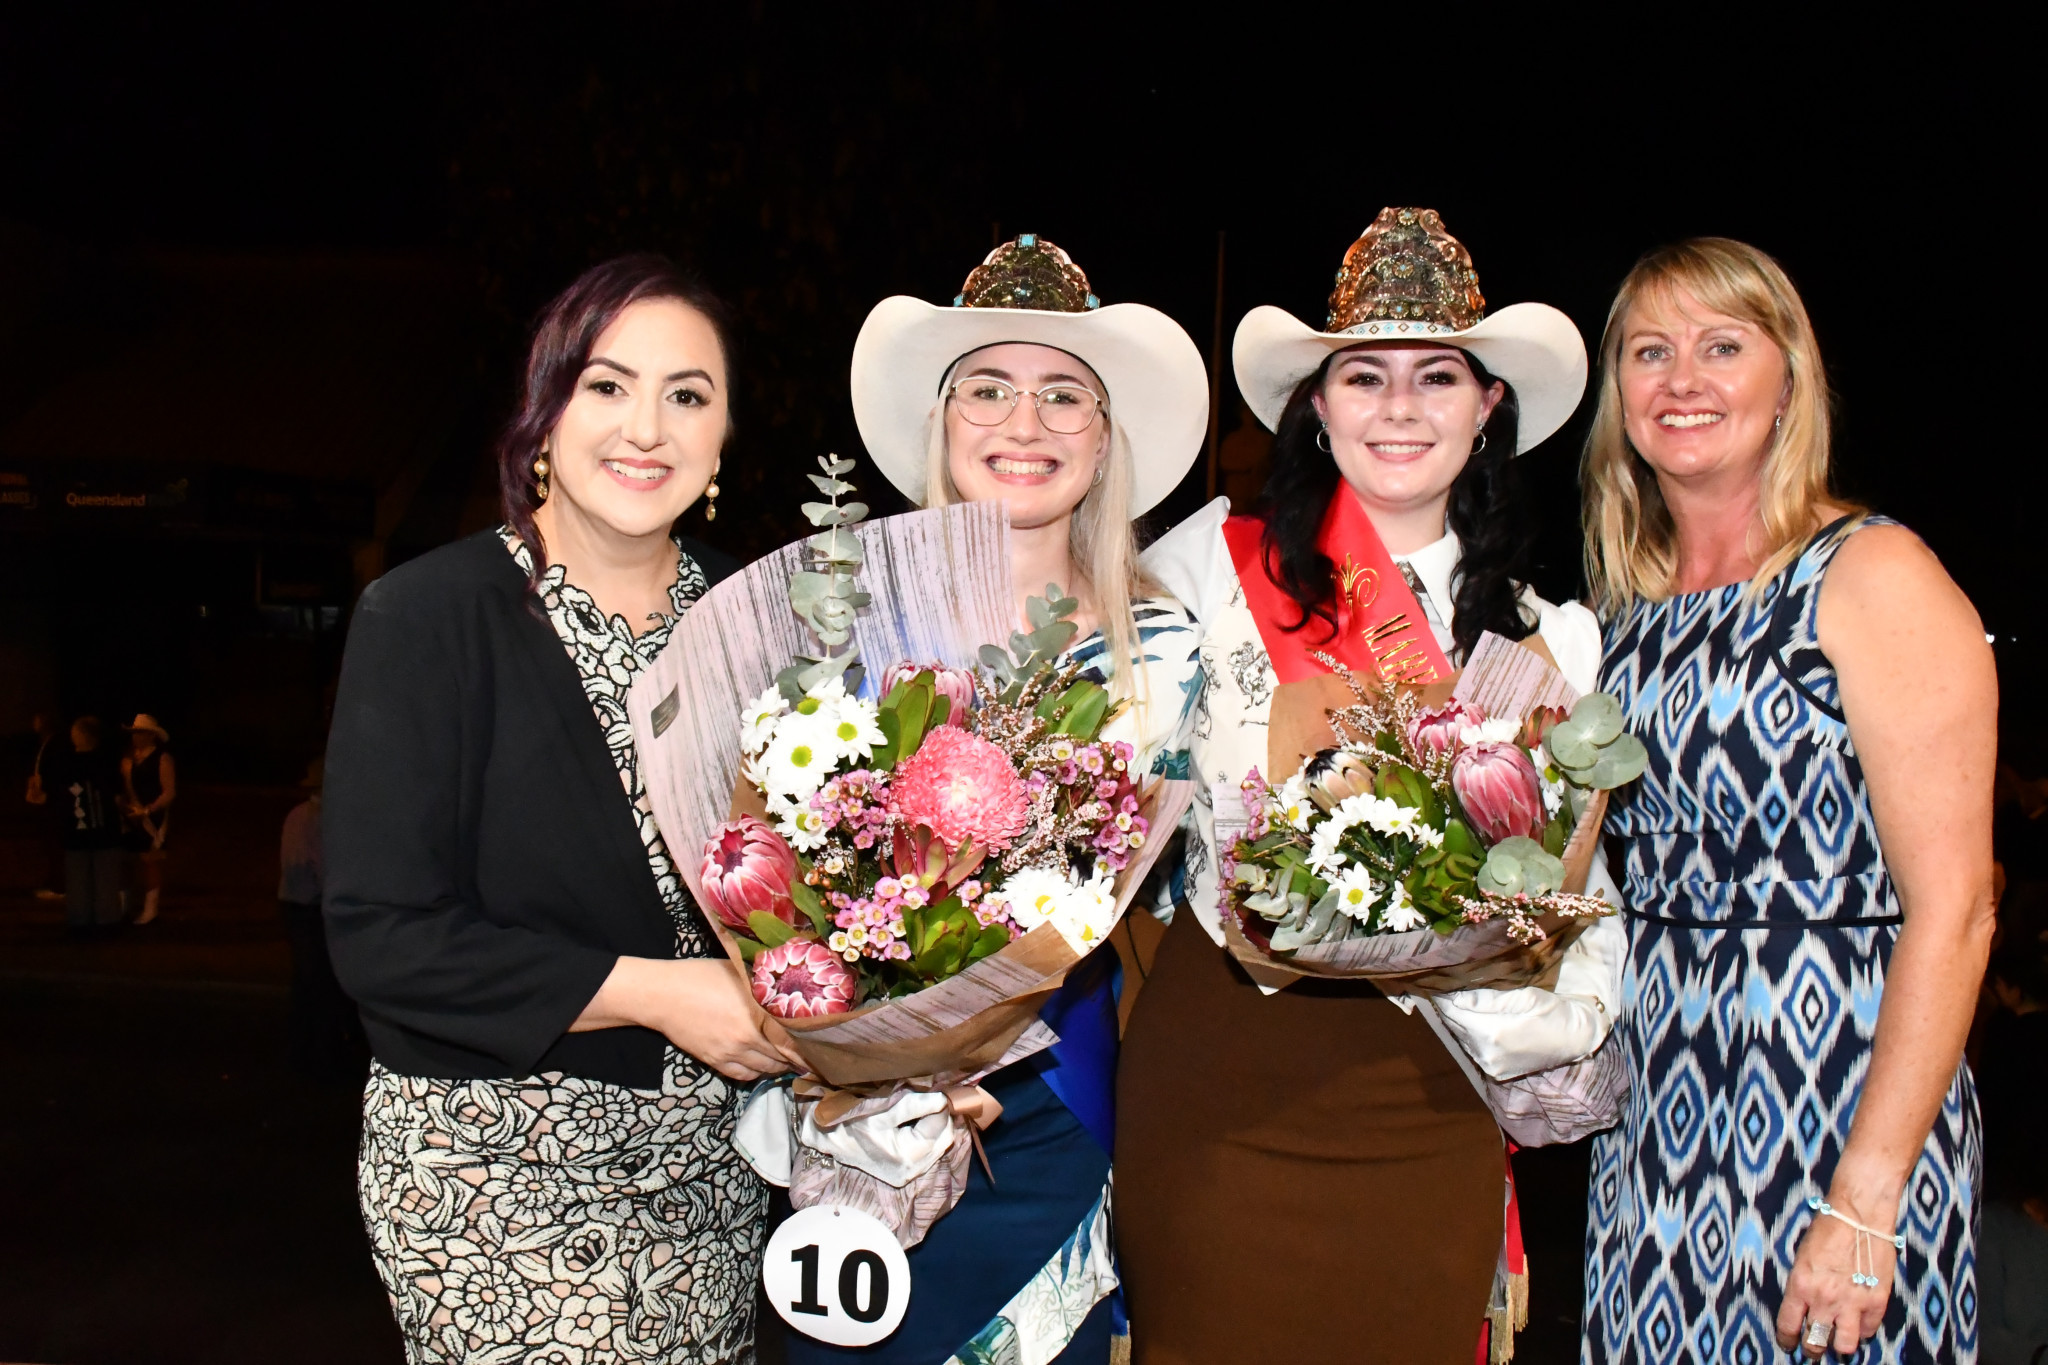 Rodeo Princess: Caitlyn Parsons On the right Rodeo Queen: Jordana Giacometti on the left. Matrons of honour: Annalisa Savaglio Left and Courtney Marcombe